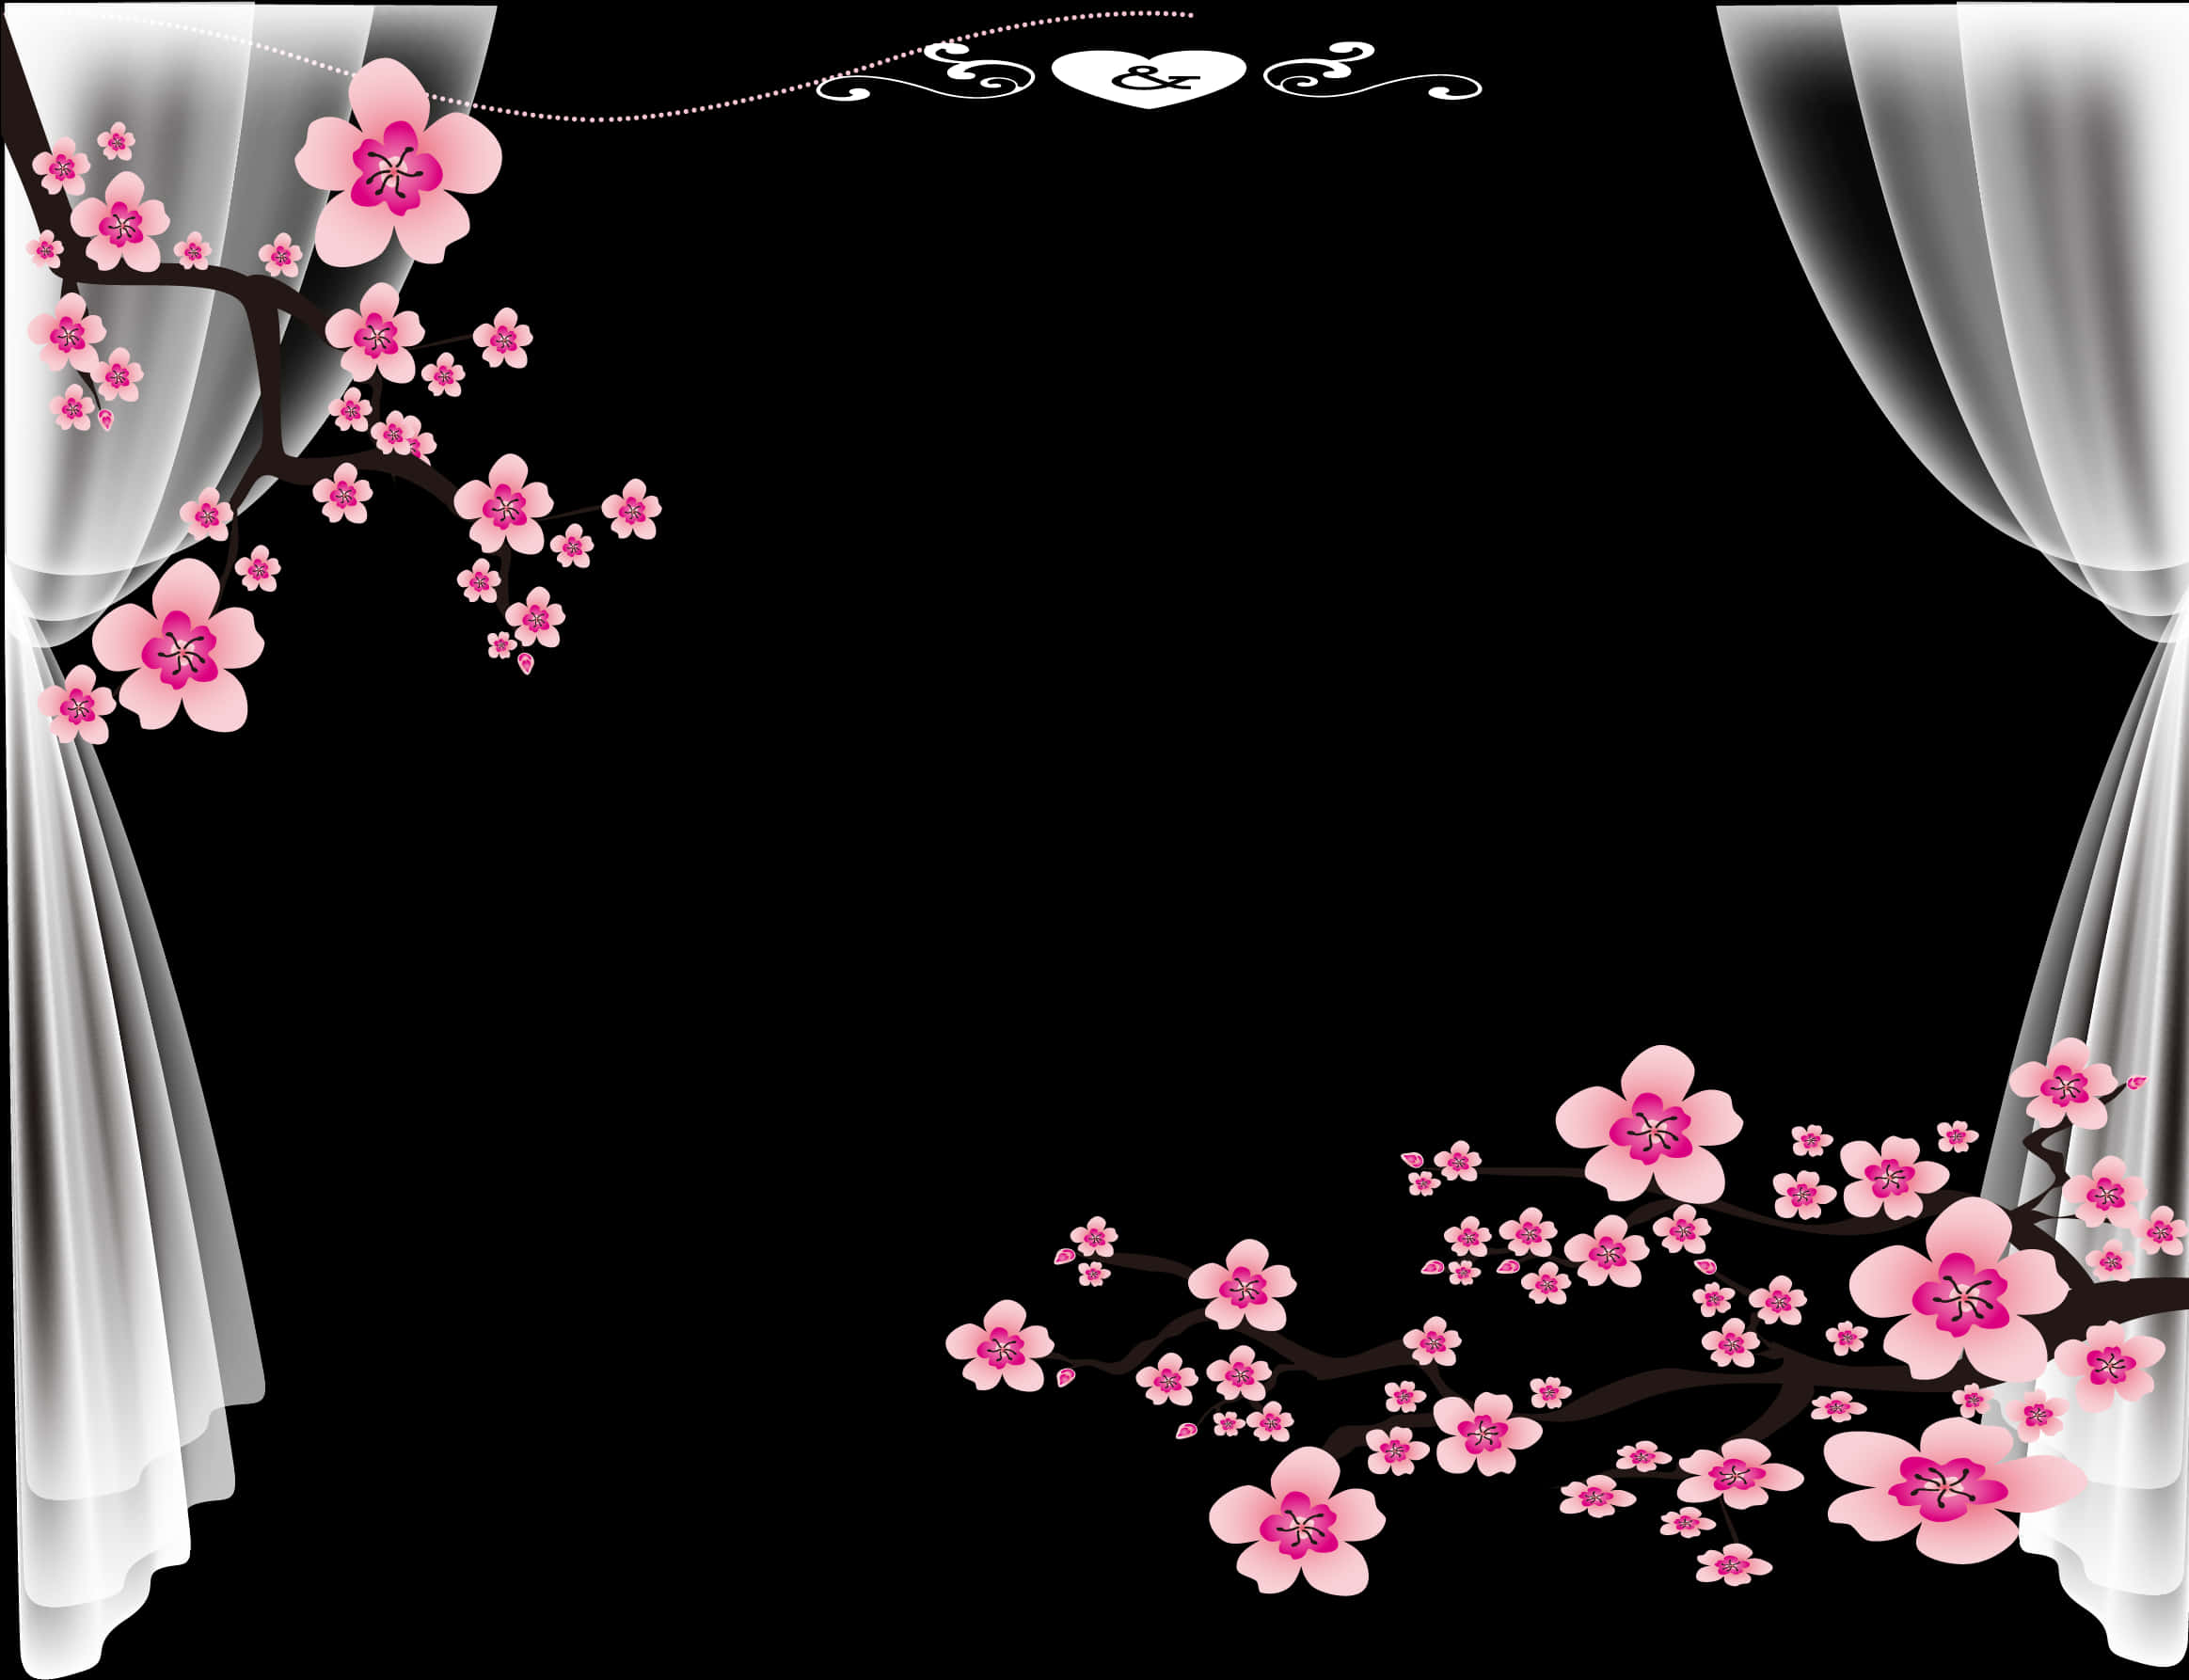 A Black And White Background With Pink Flowers